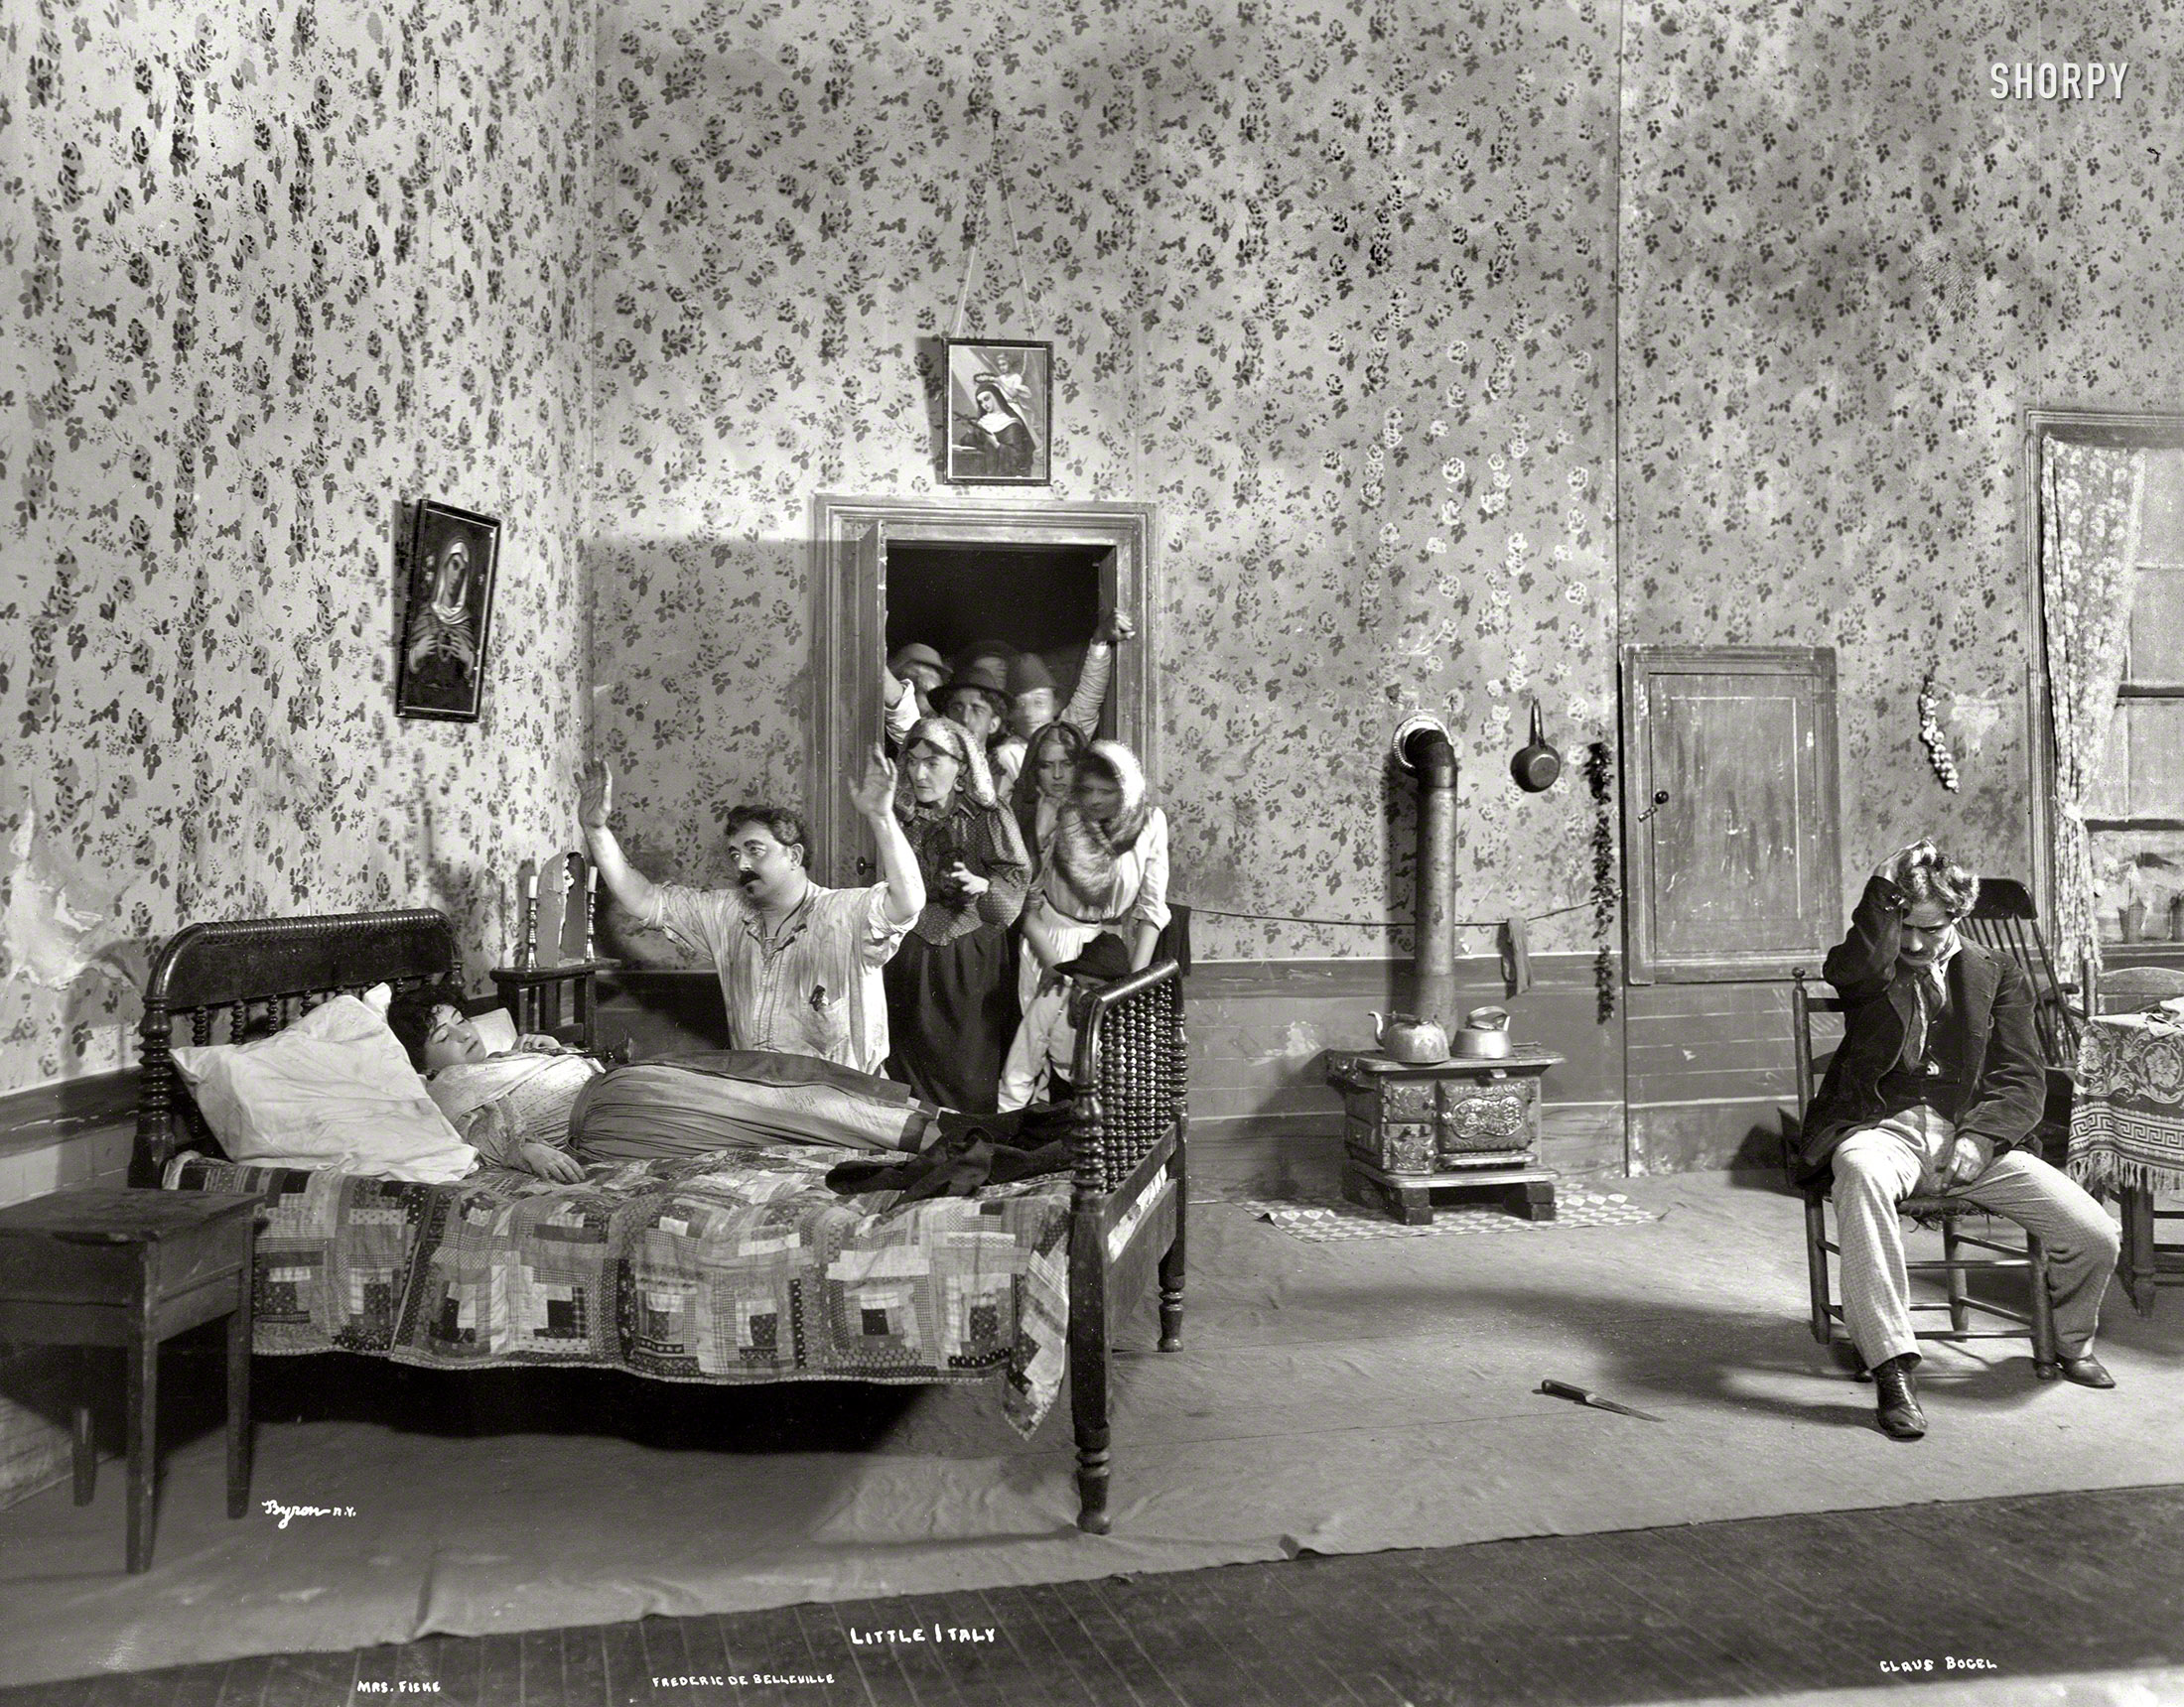 &nbsp; &nbsp; &nbsp; &nbsp; "Permeated by the passionate, vengeful Neapolitan spirit, despite a pleasing lack of half-intelligible broken English."
-- New York Times

New York, 1902. "Scene from Little Italy showing Minnie Maddern Fiske on bed, Frederic De Belleville kneeling, Claus Bogel seated with head bowed, and group of people in doorway." Little Italy, a "one-act tragedy of the East Side" by Horace Fry first performed in 1898, was revived on Broadway in 1902 for a 24-performance run at the Manhattan Theatre. Joseph Byron photo. View full size.